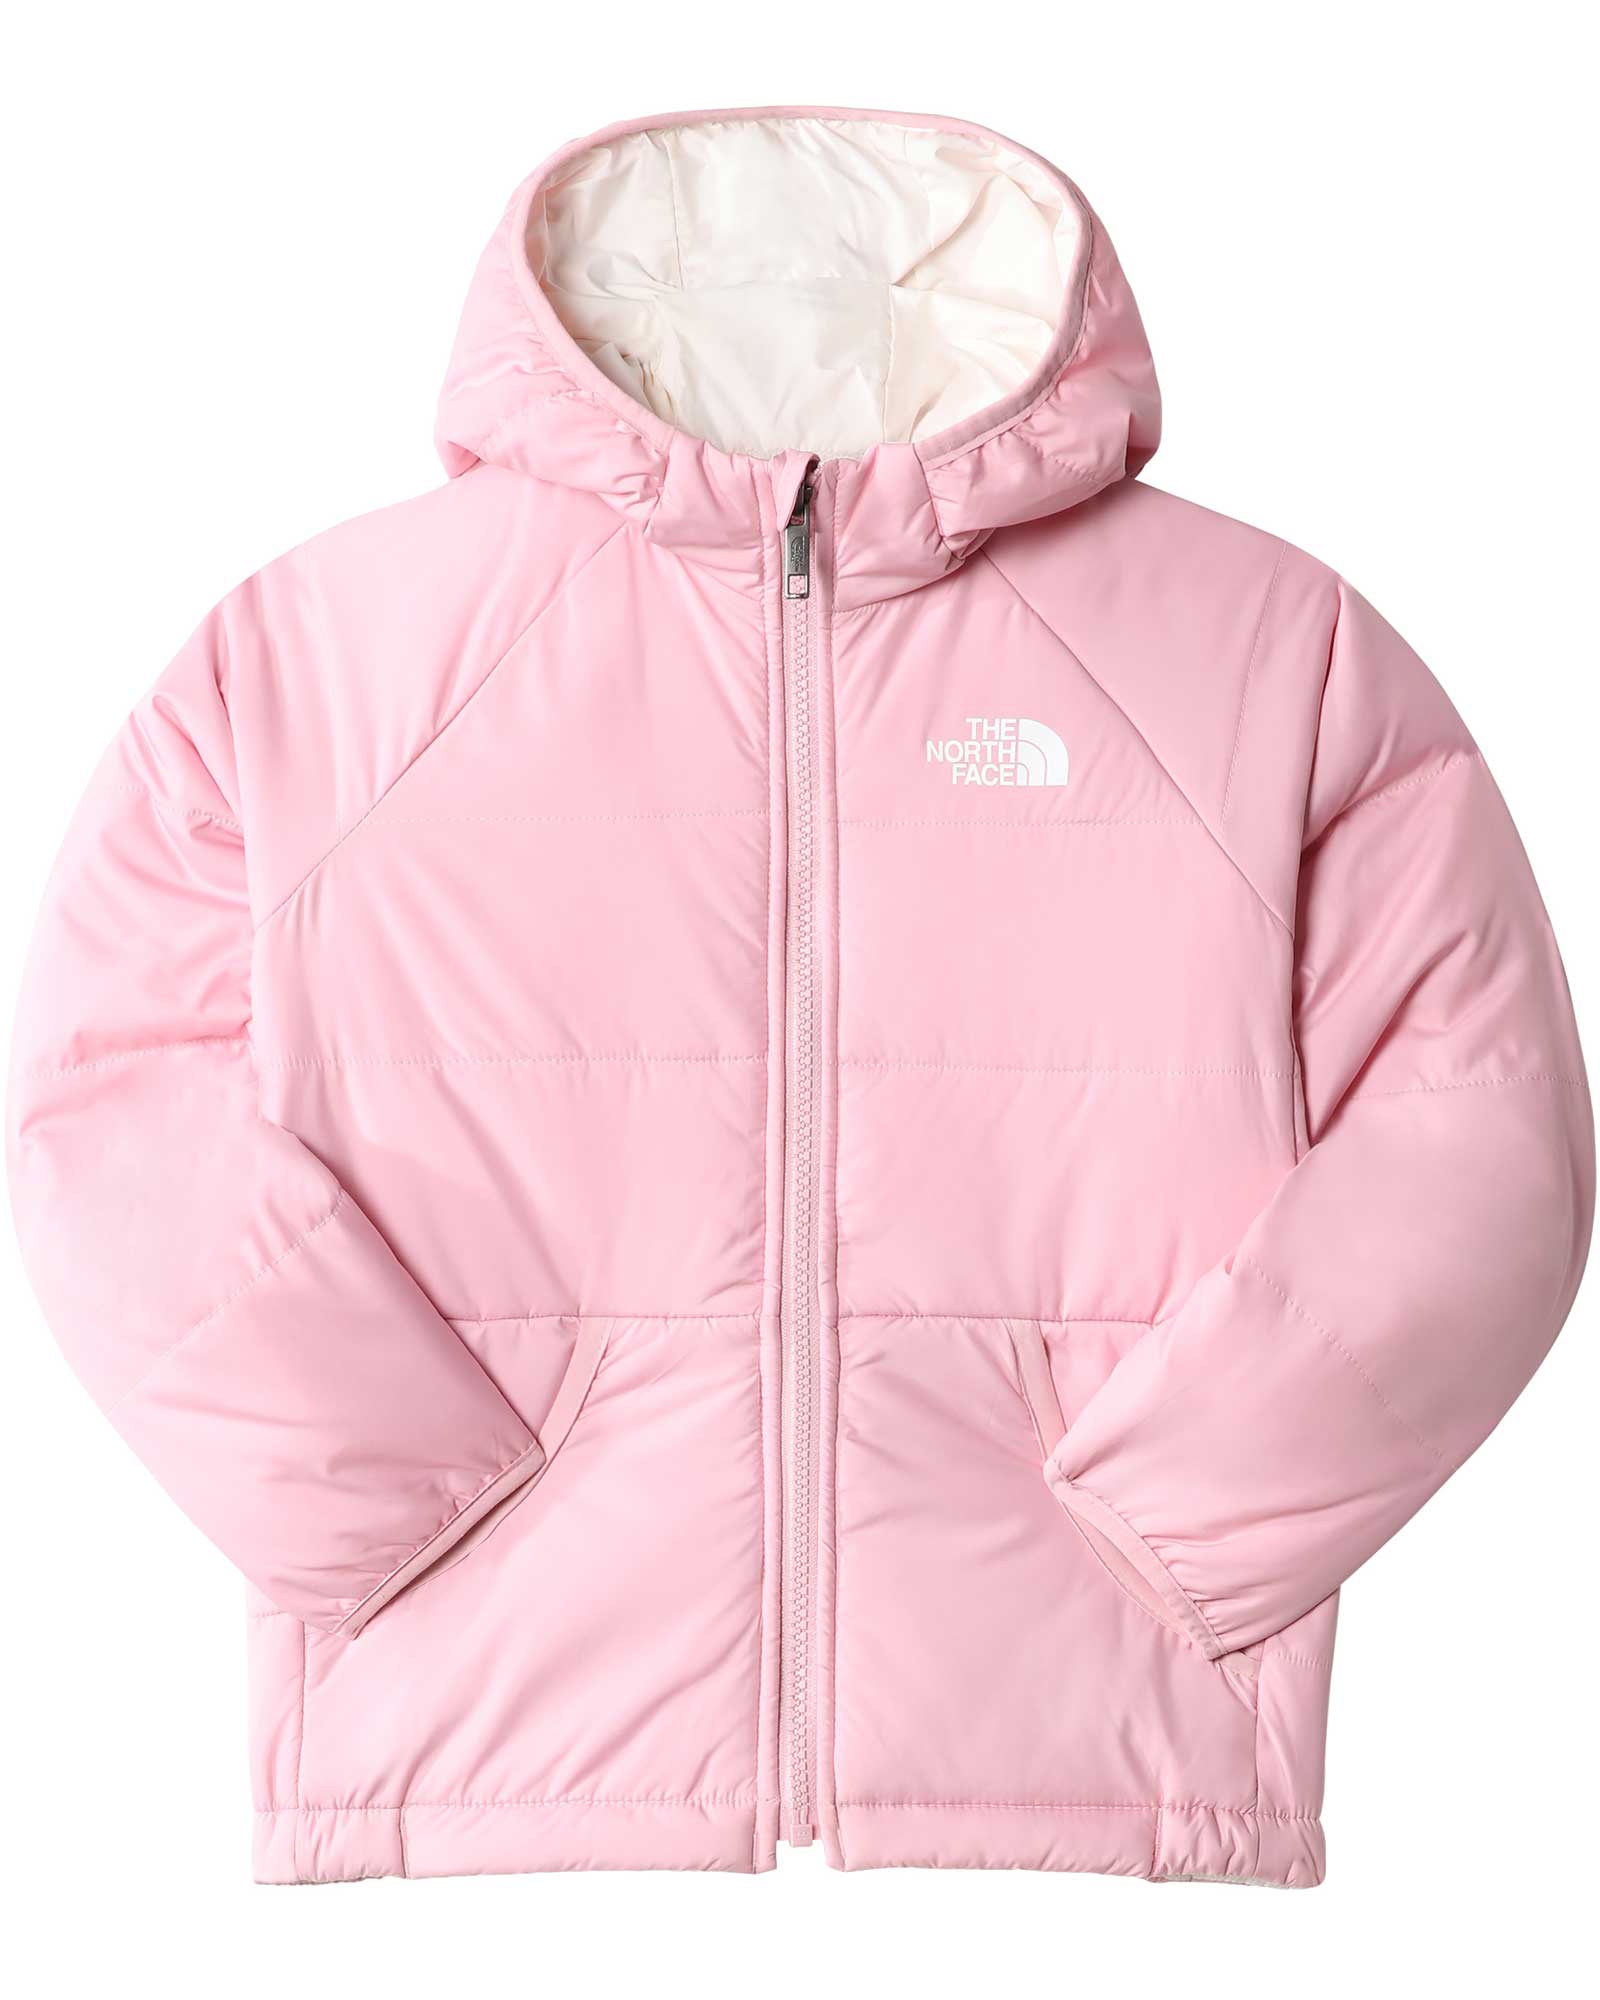 Product image of The North Face Reversible Perrito Kids' Hooded Jacket